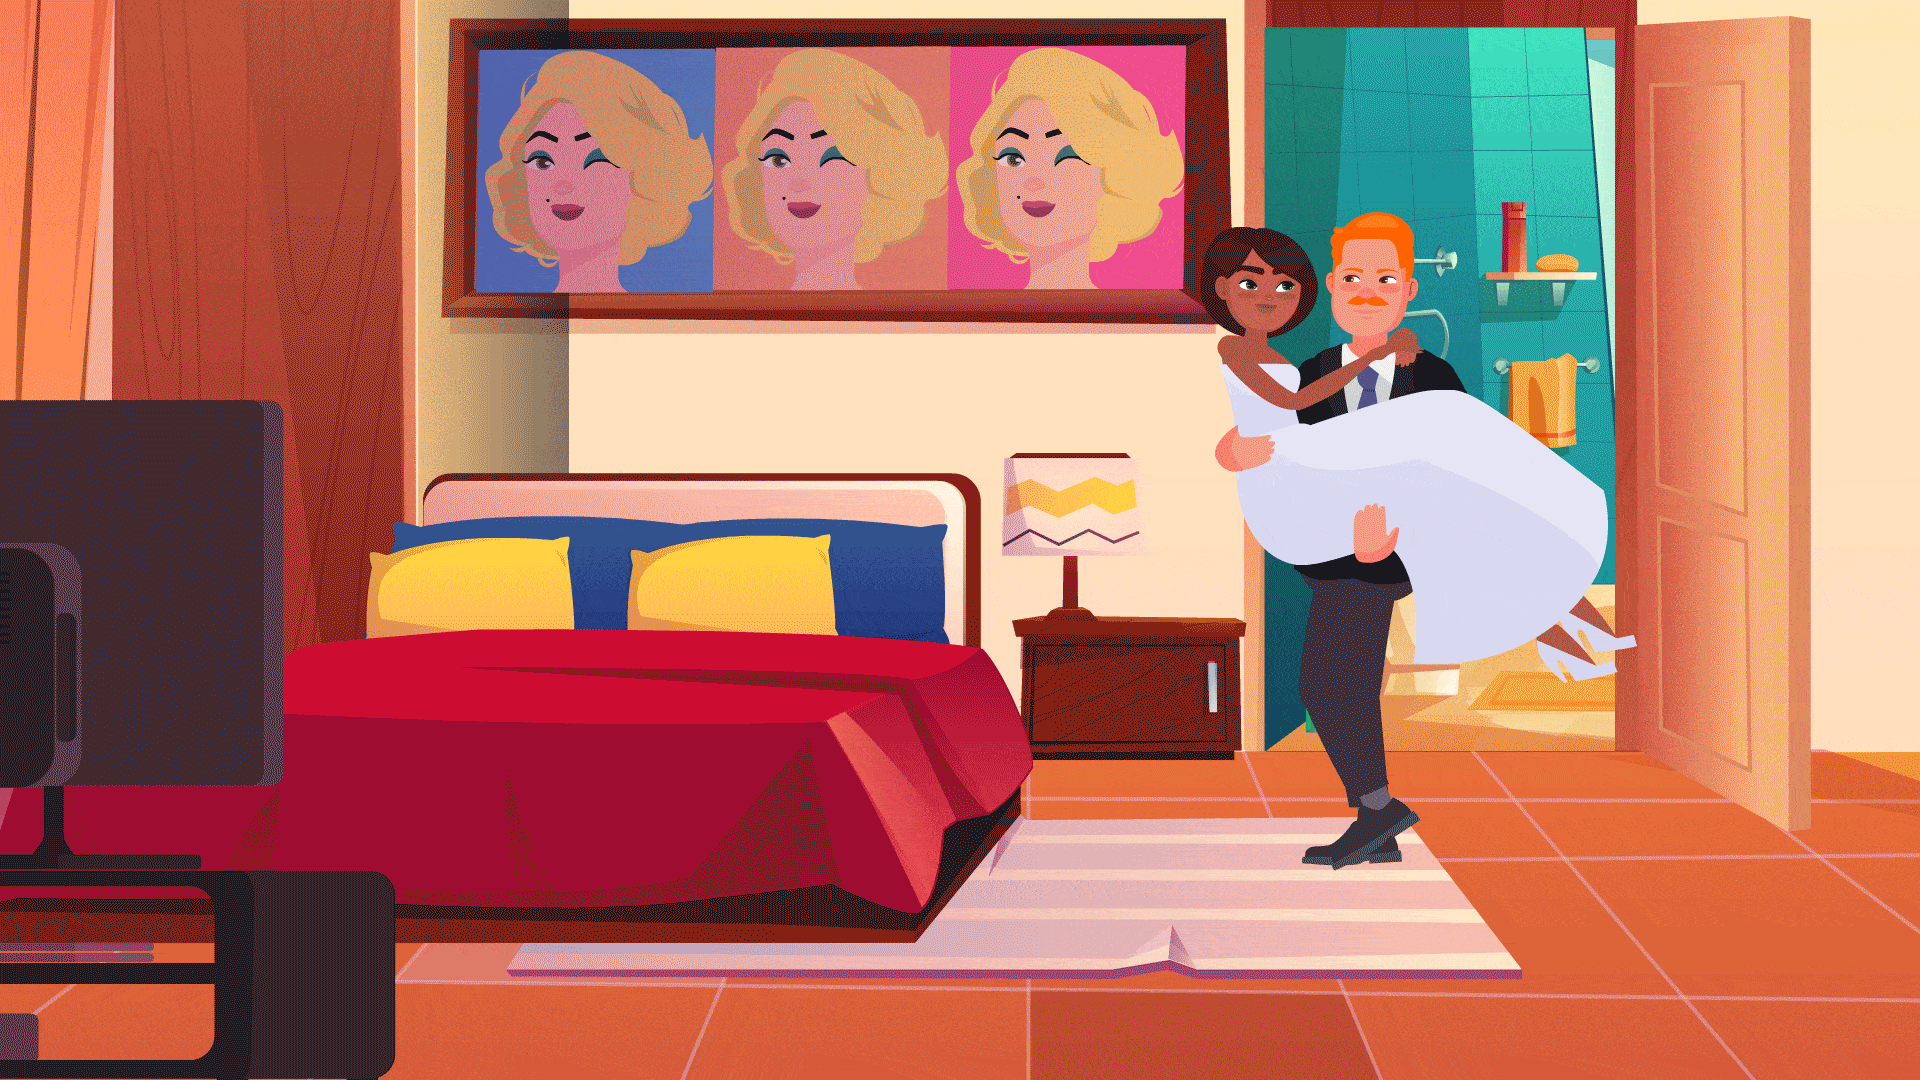 The first wedding night. Funny 2d graphics